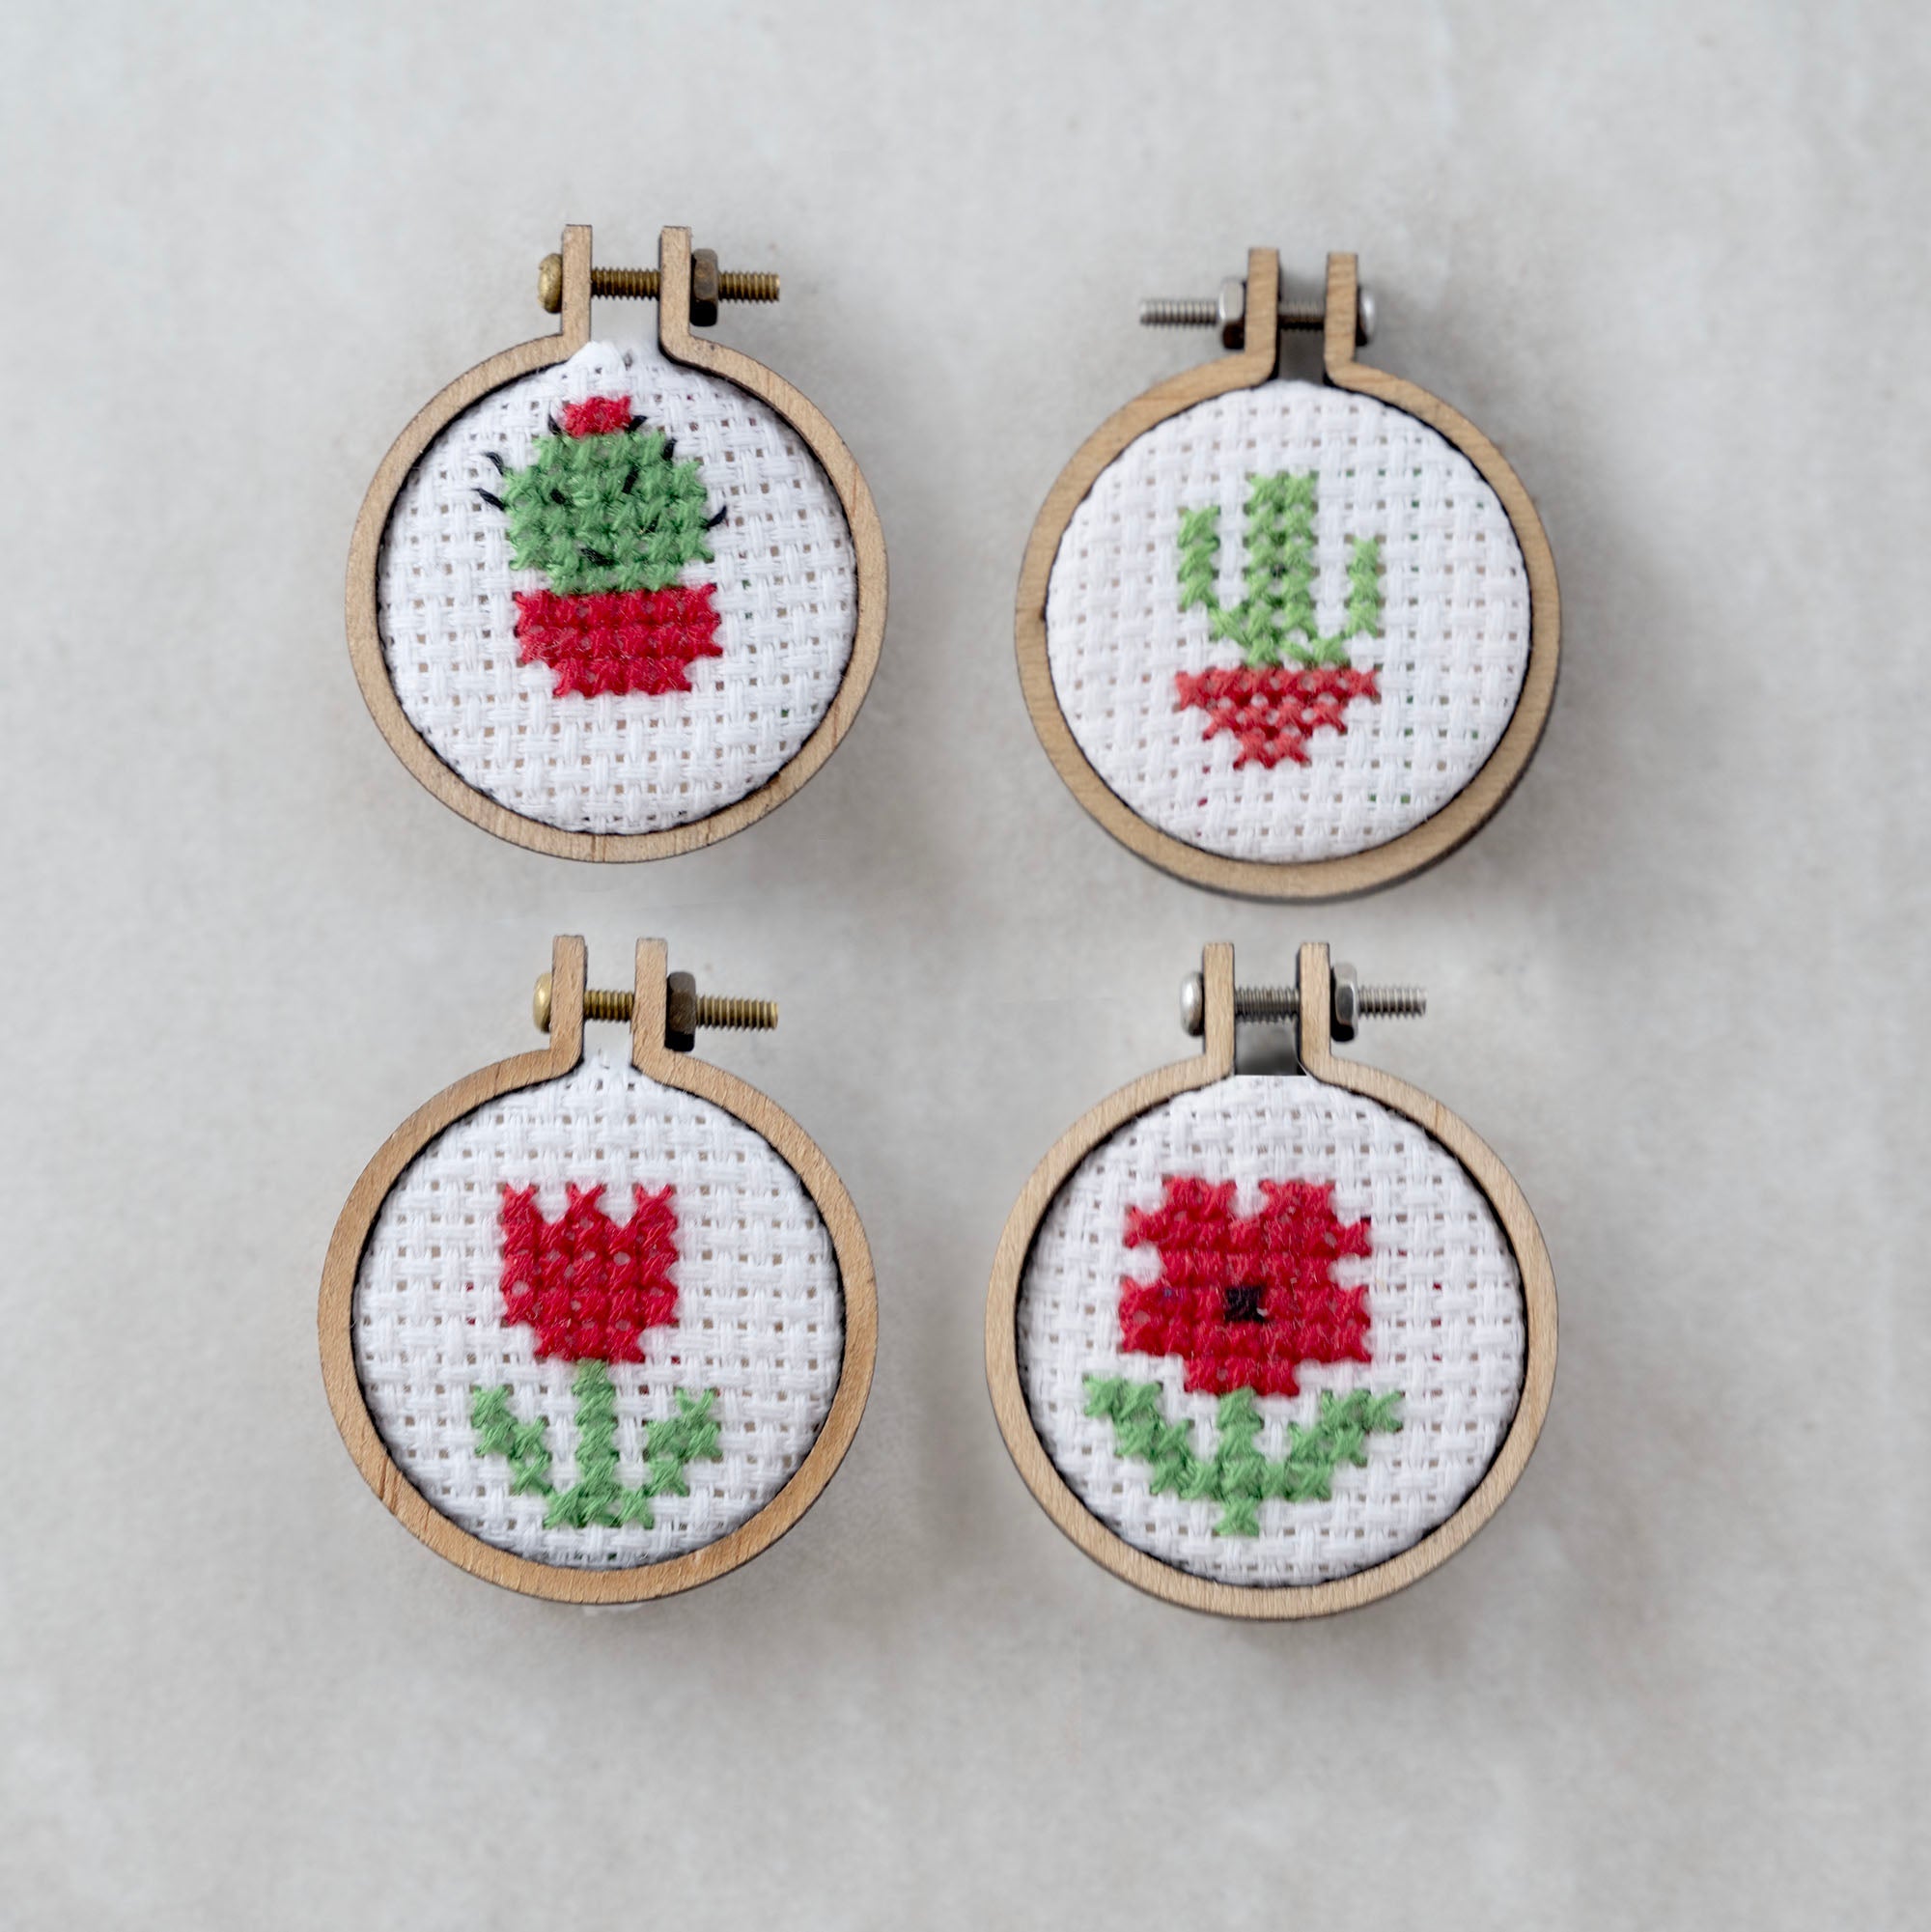 Pricking Perfect Hoop Cross Stitch Kit In A Matchbox